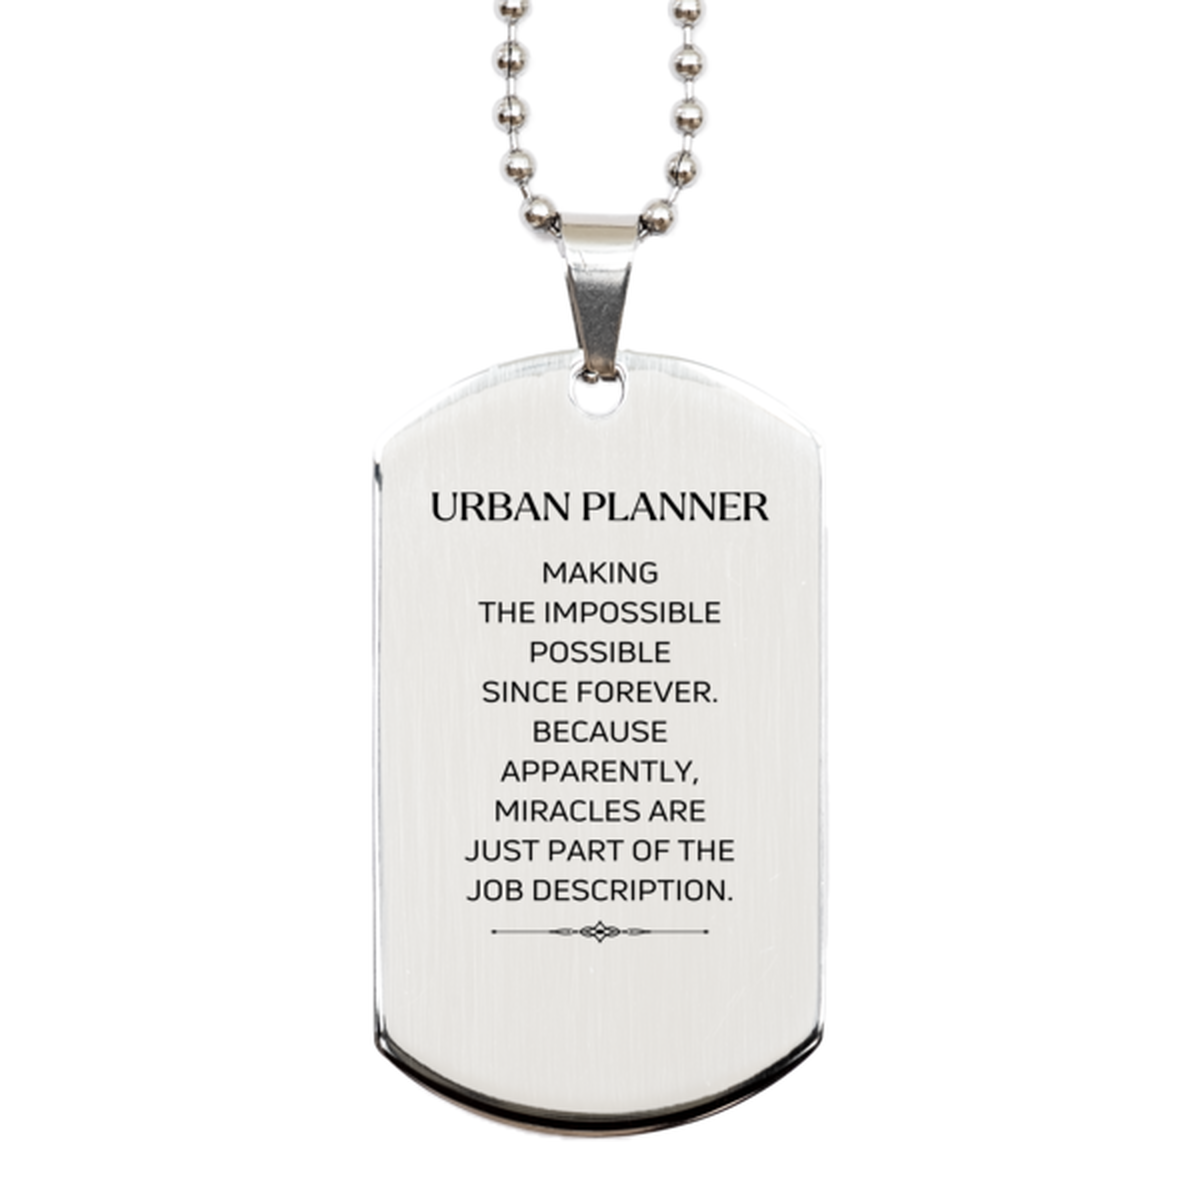 Funny Urban Planner Gifts, Miracles are just part of the job description, Inspirational Birthday Silver Dog Tag For Urban Planner, Men, Women, Coworkers, Friends, Boss